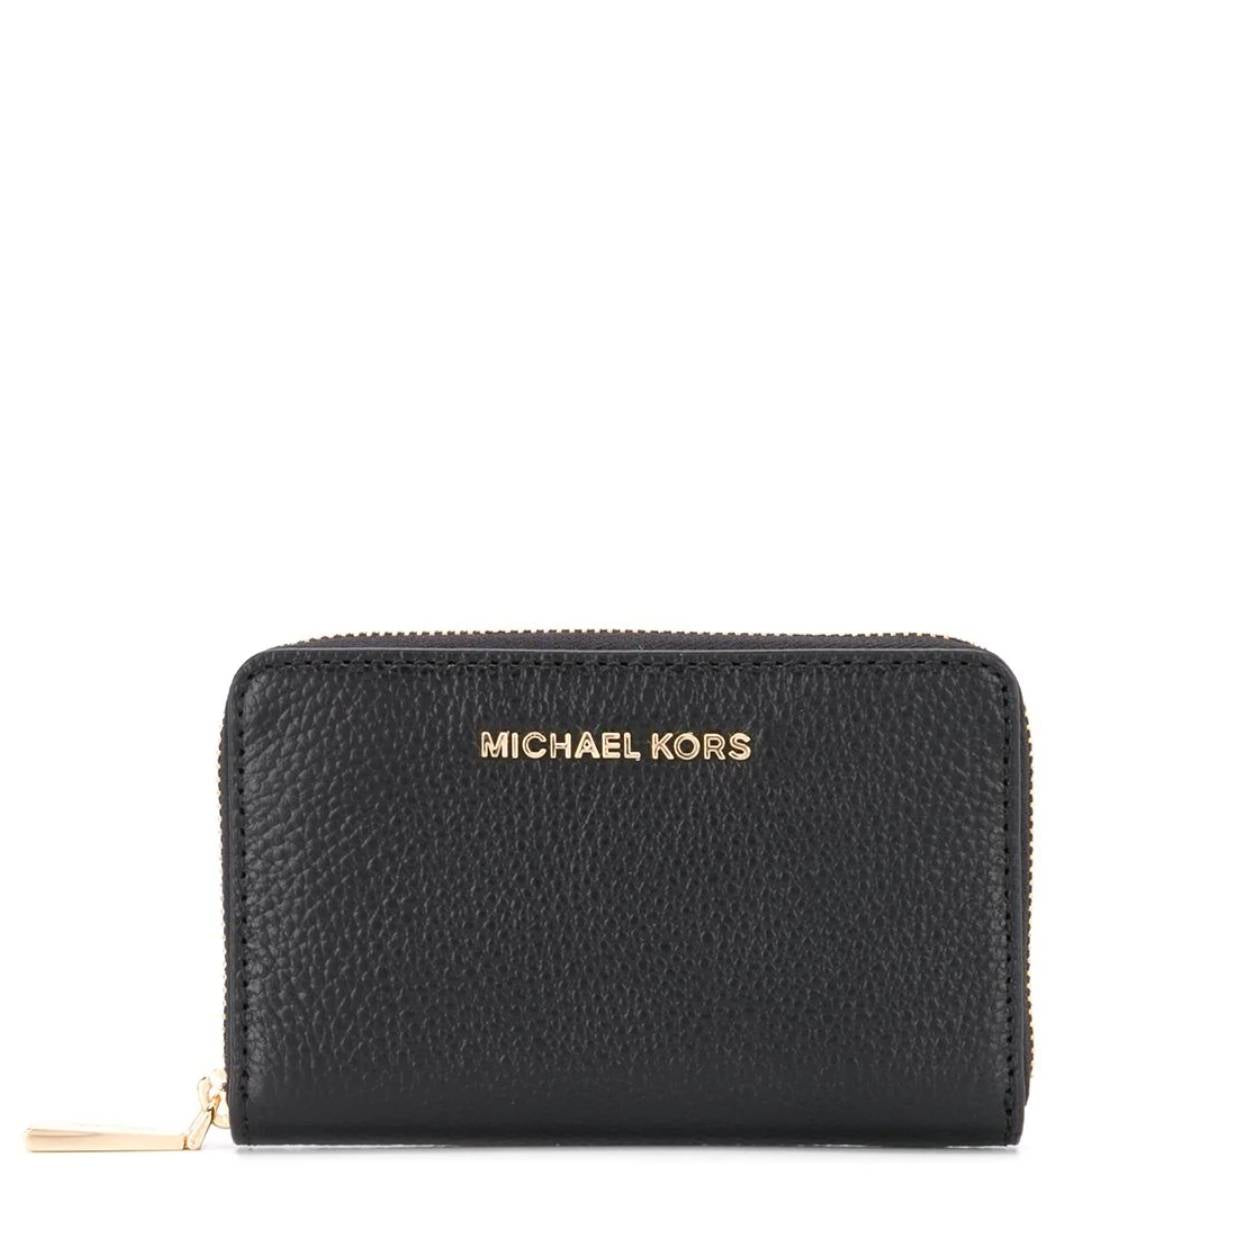 Small Womens Wallet MICHAEL MICHAEL KORS  Accessories and handbags   Womens wallets  Wallets  Leather goods  Accessories  DialadogwashShops